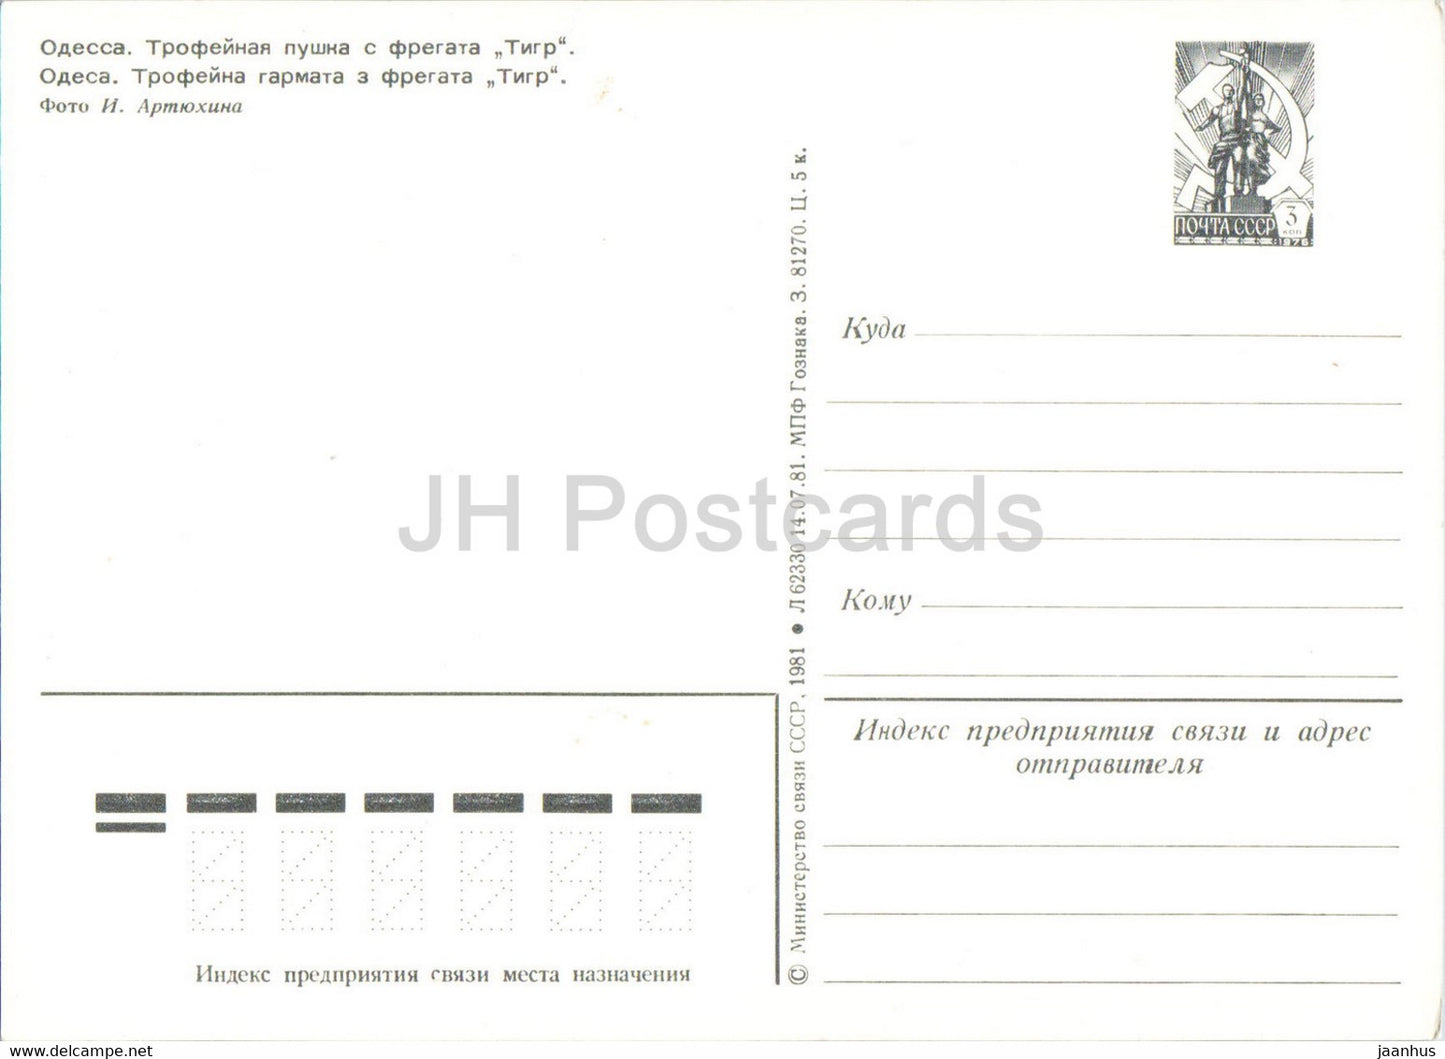 Odessa - trophy cannon from frigate Tiger - military - postal stationery - 1981 - Ukraine USSR - unused